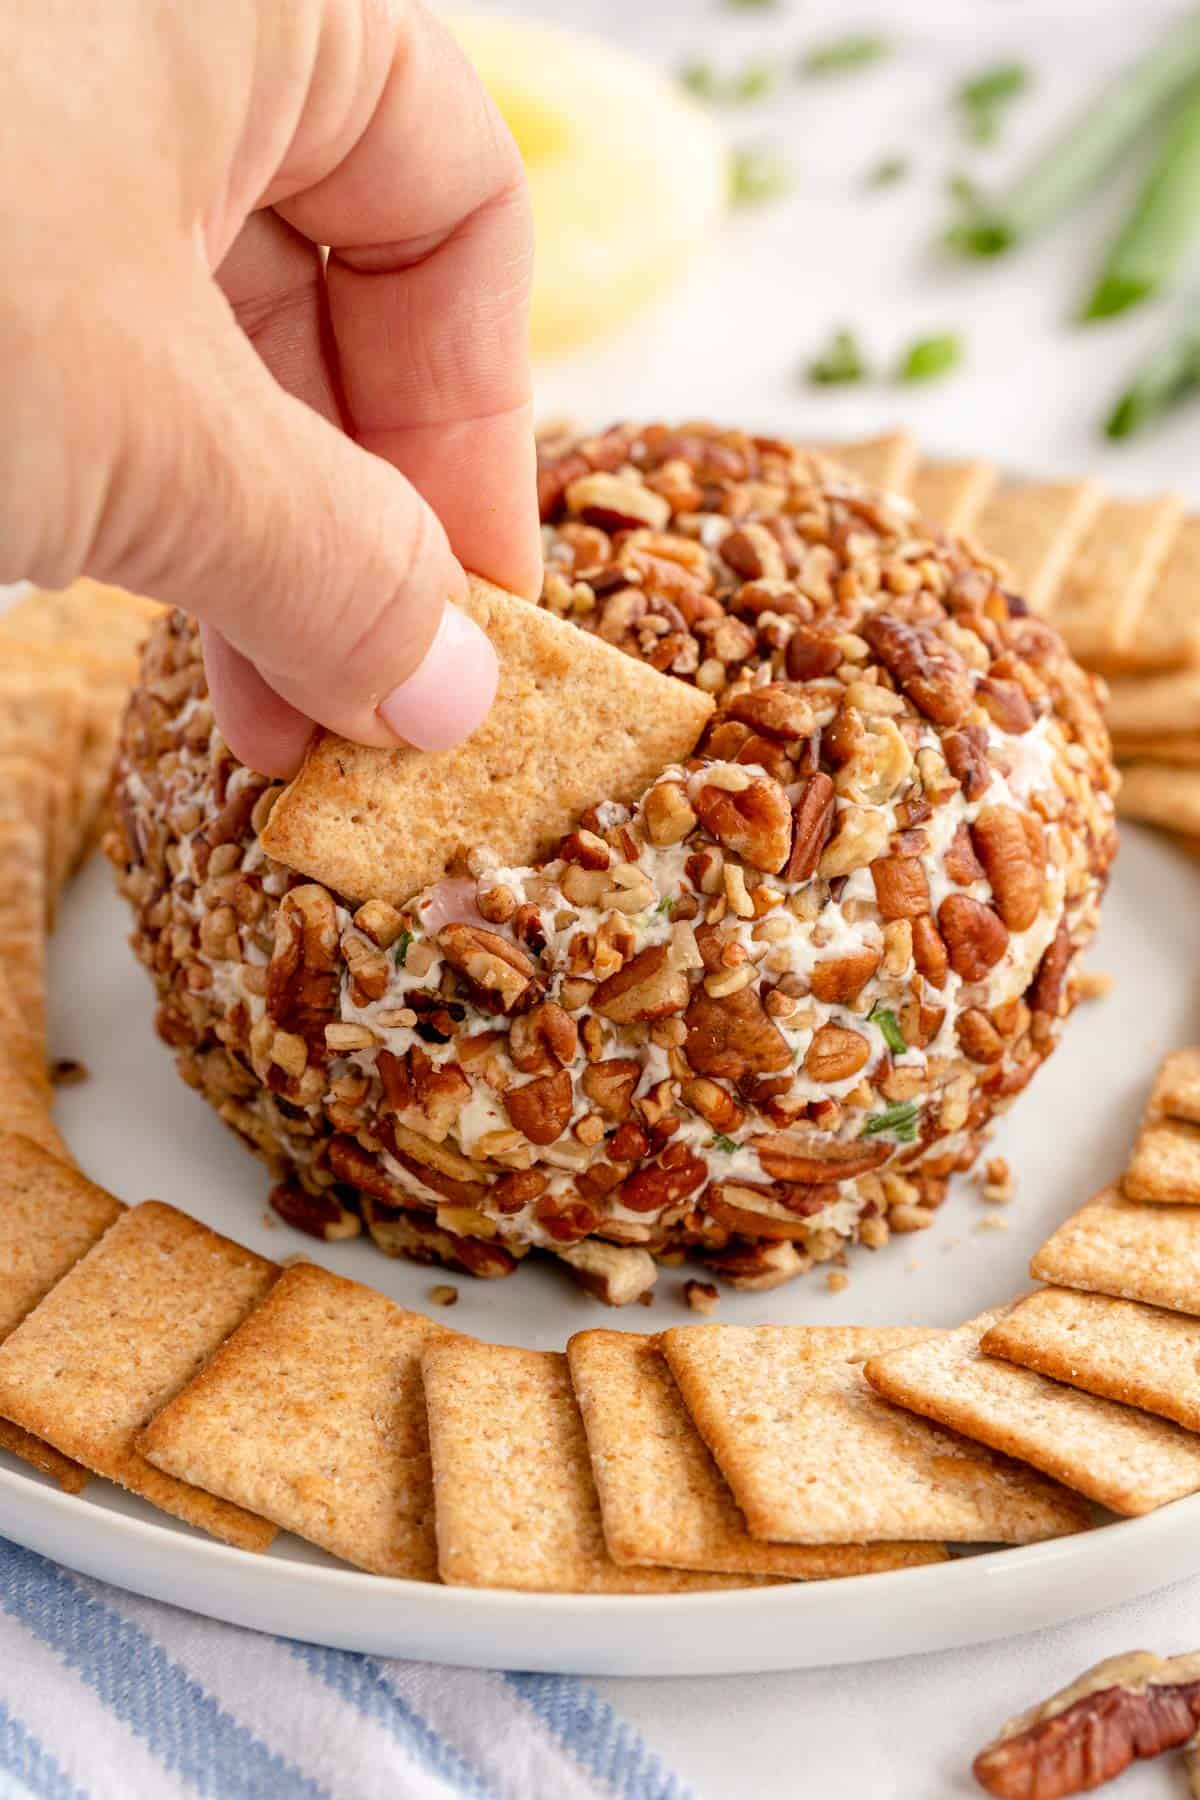 a hand digging into a pineapple cheese ball with a cracker